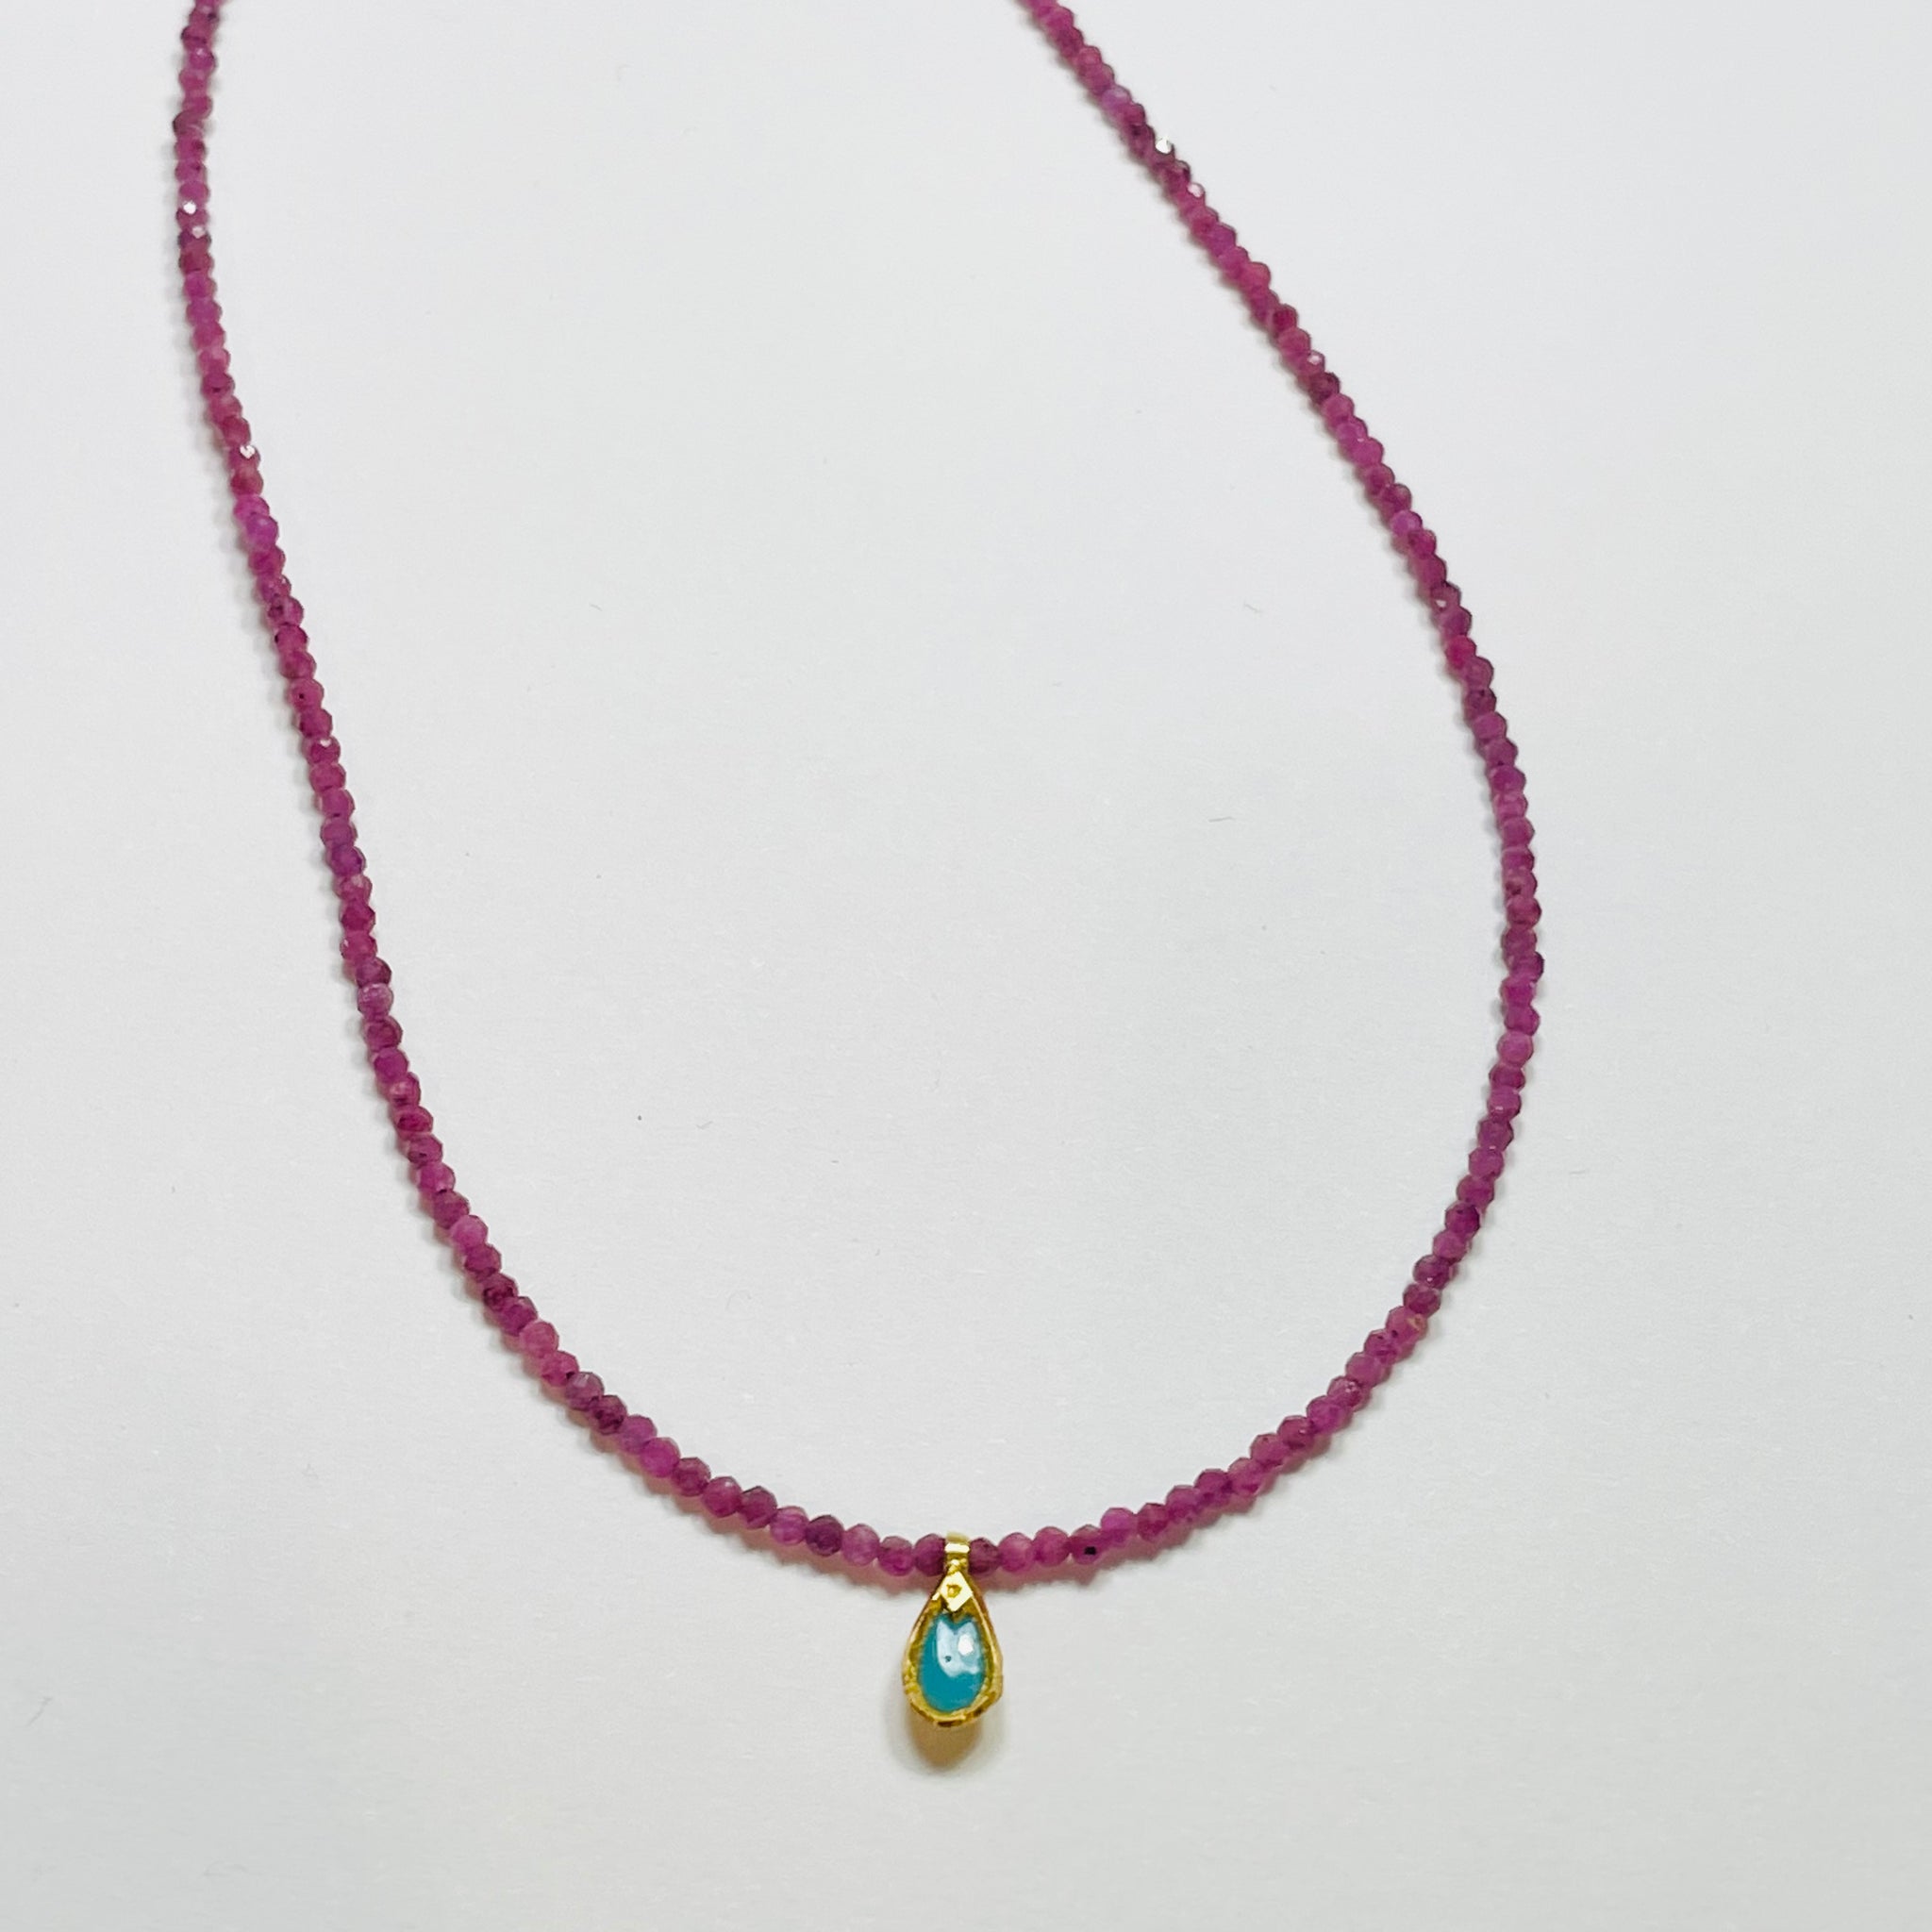 delicate ruby necklace with turquoise charm